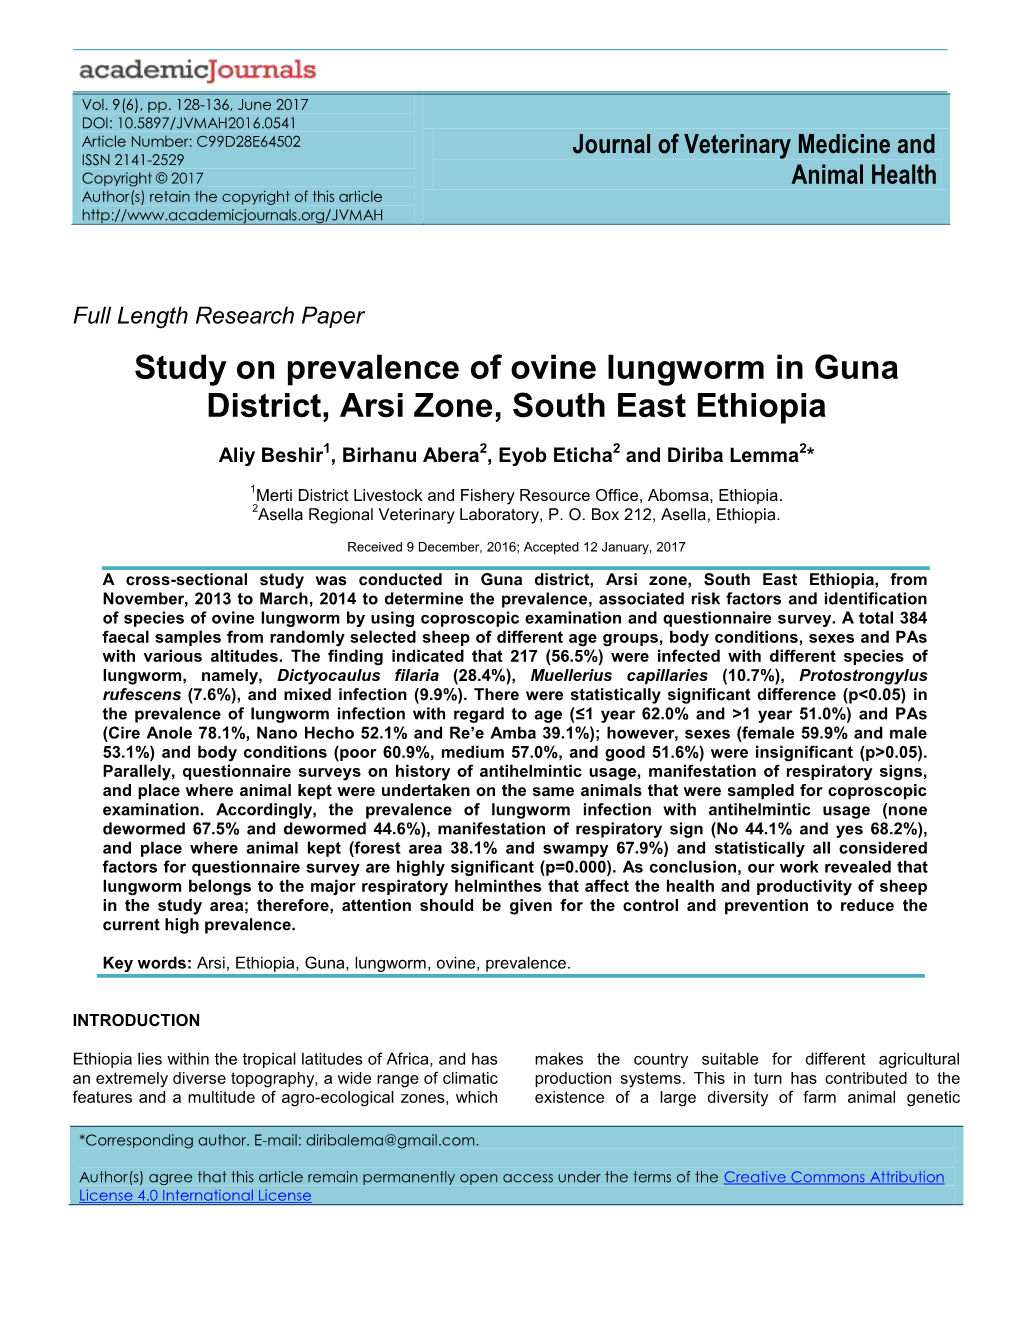 Study on Prevalence of Ovine Lungworm in Guna District, Arsi Zone, South East Ethiopia